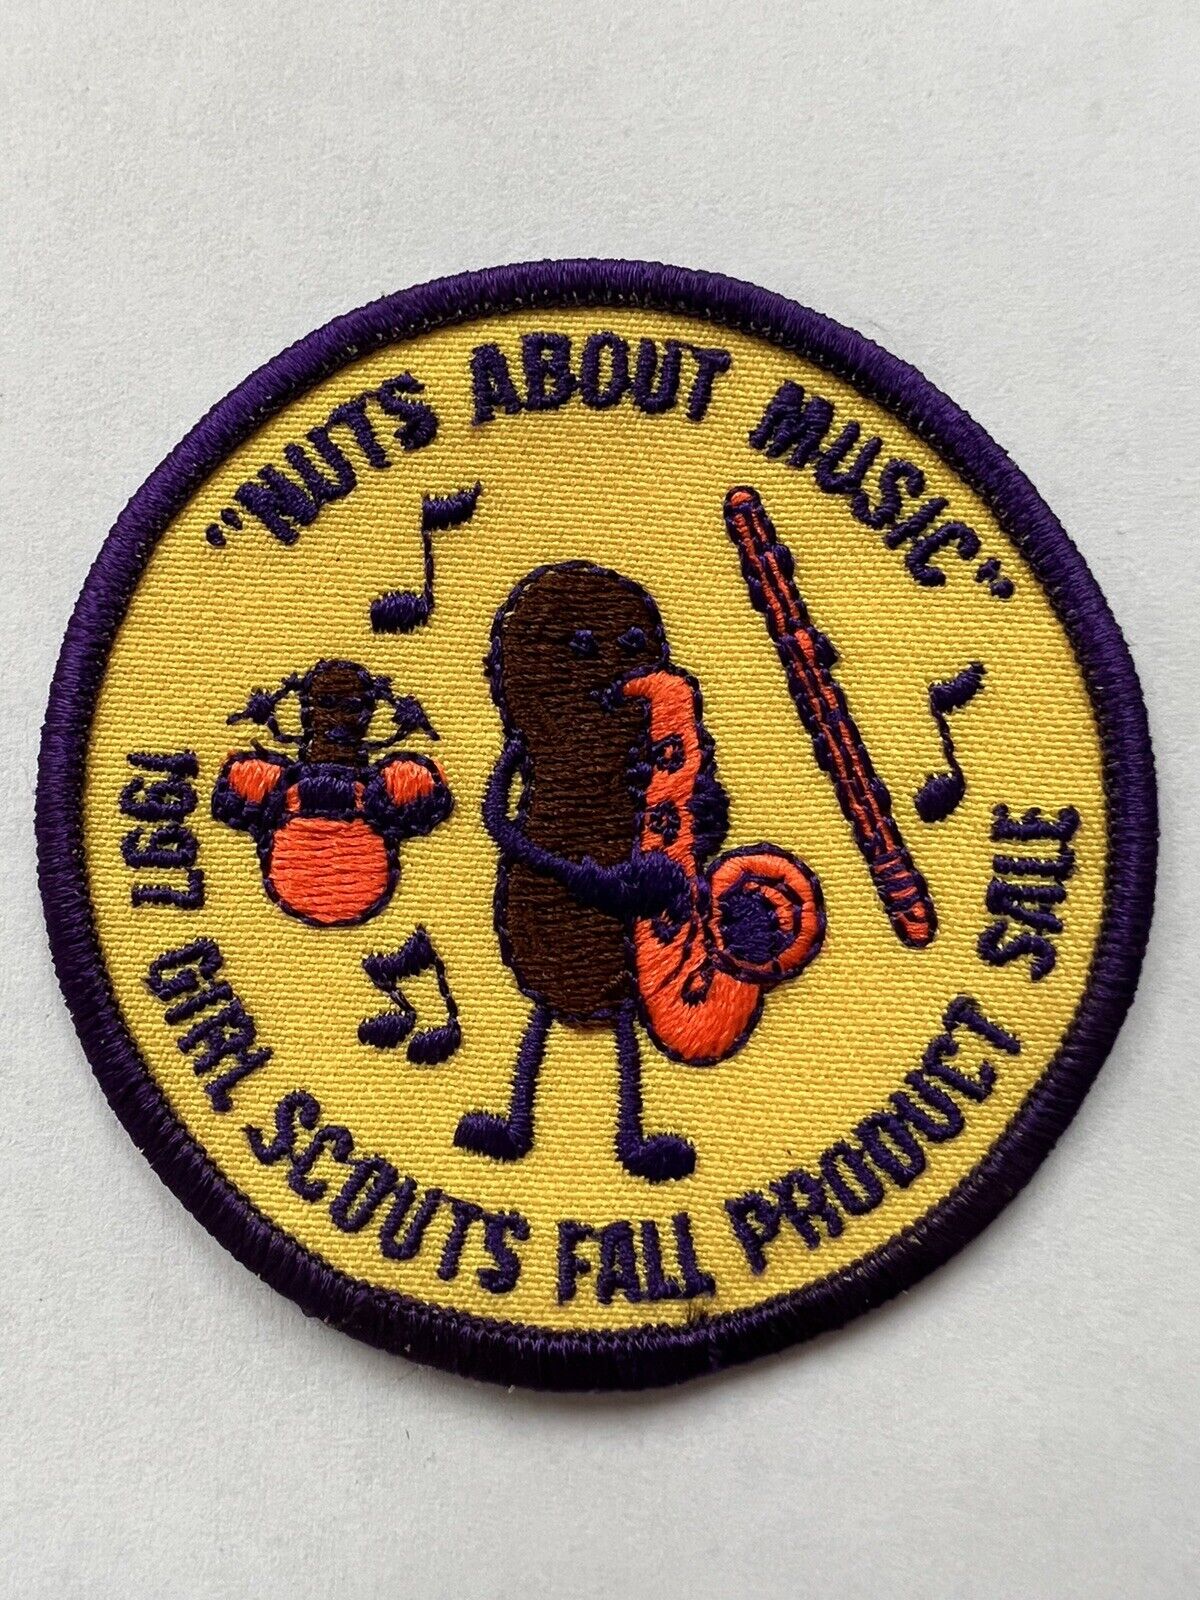 Vintage Patch Girl Scouts Nuts About Music 1997 Fall Product Sale Purple Yellow